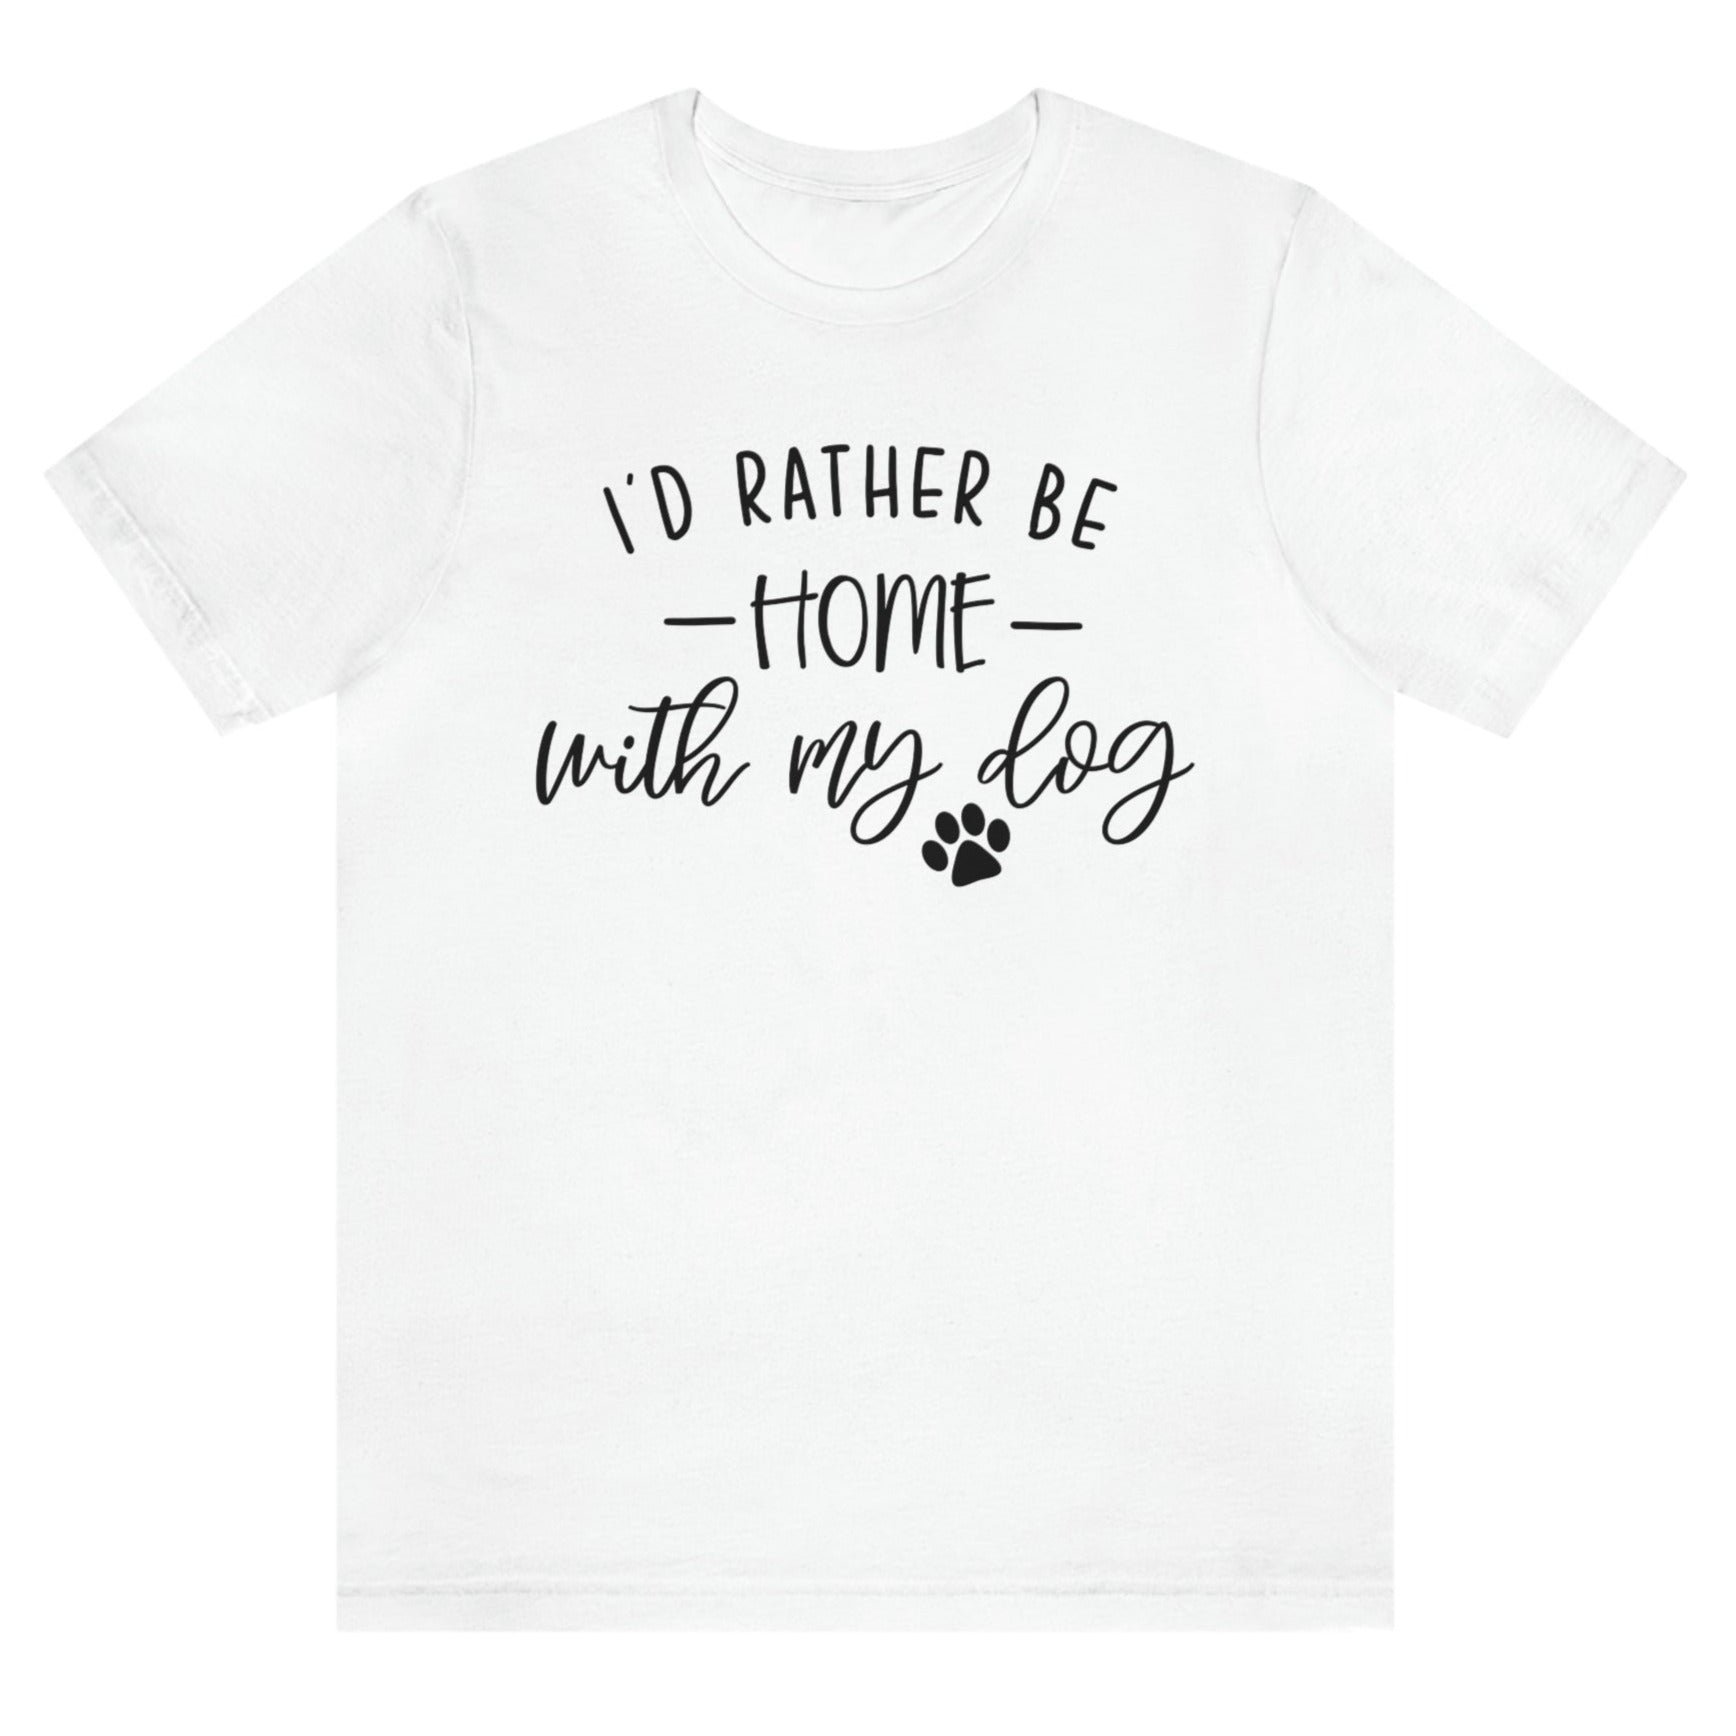 id-rather-be-home-with-my-dog-white-t-shirt-animal-lover